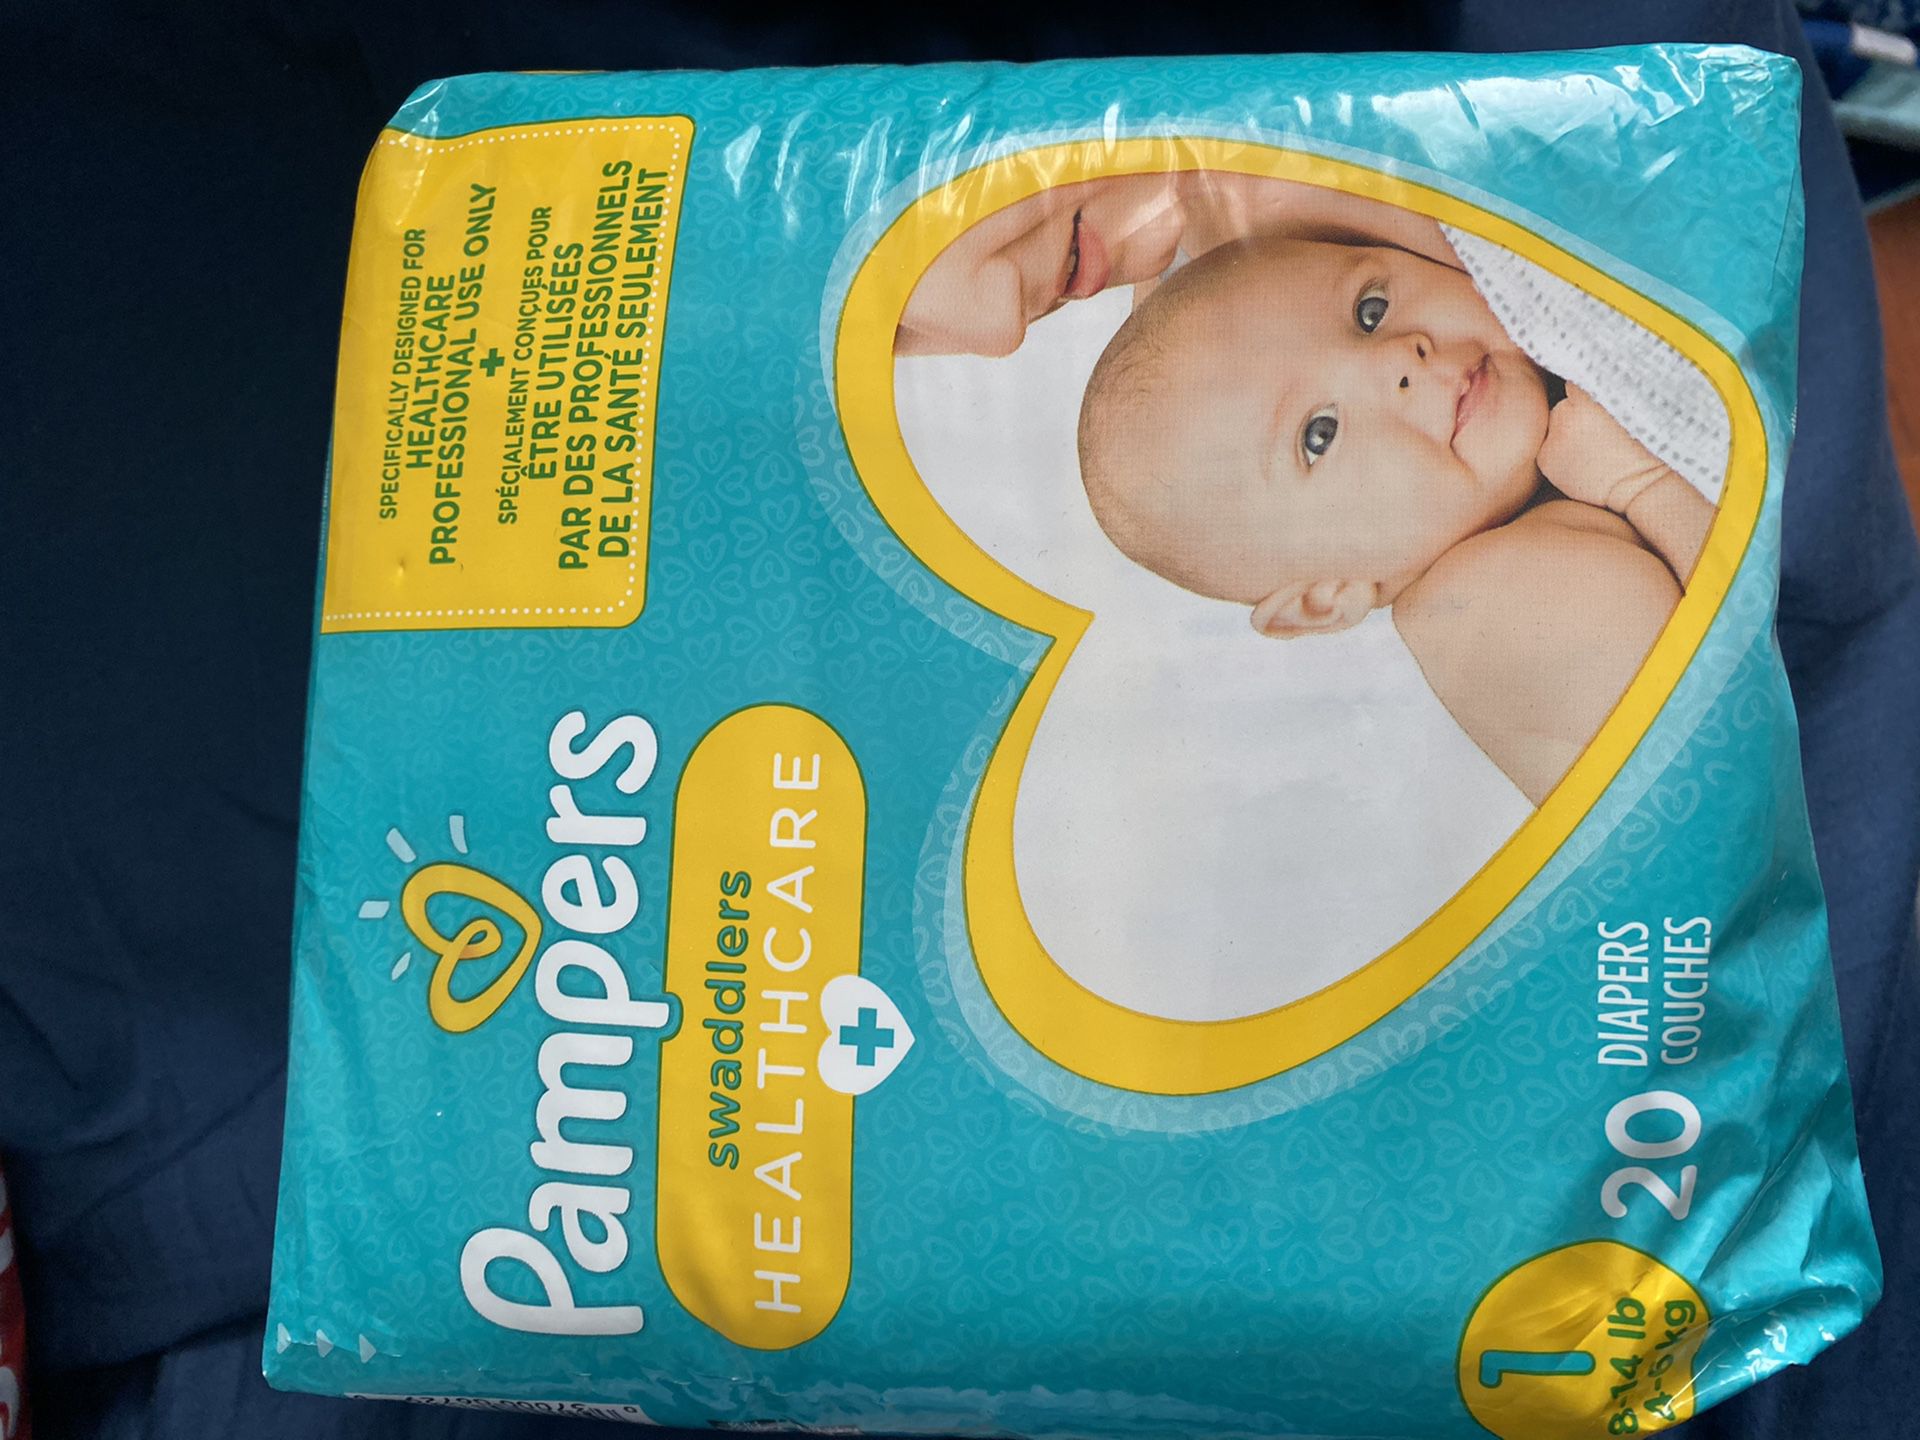 New Pampers, New clipper, newborn belly button protectors.